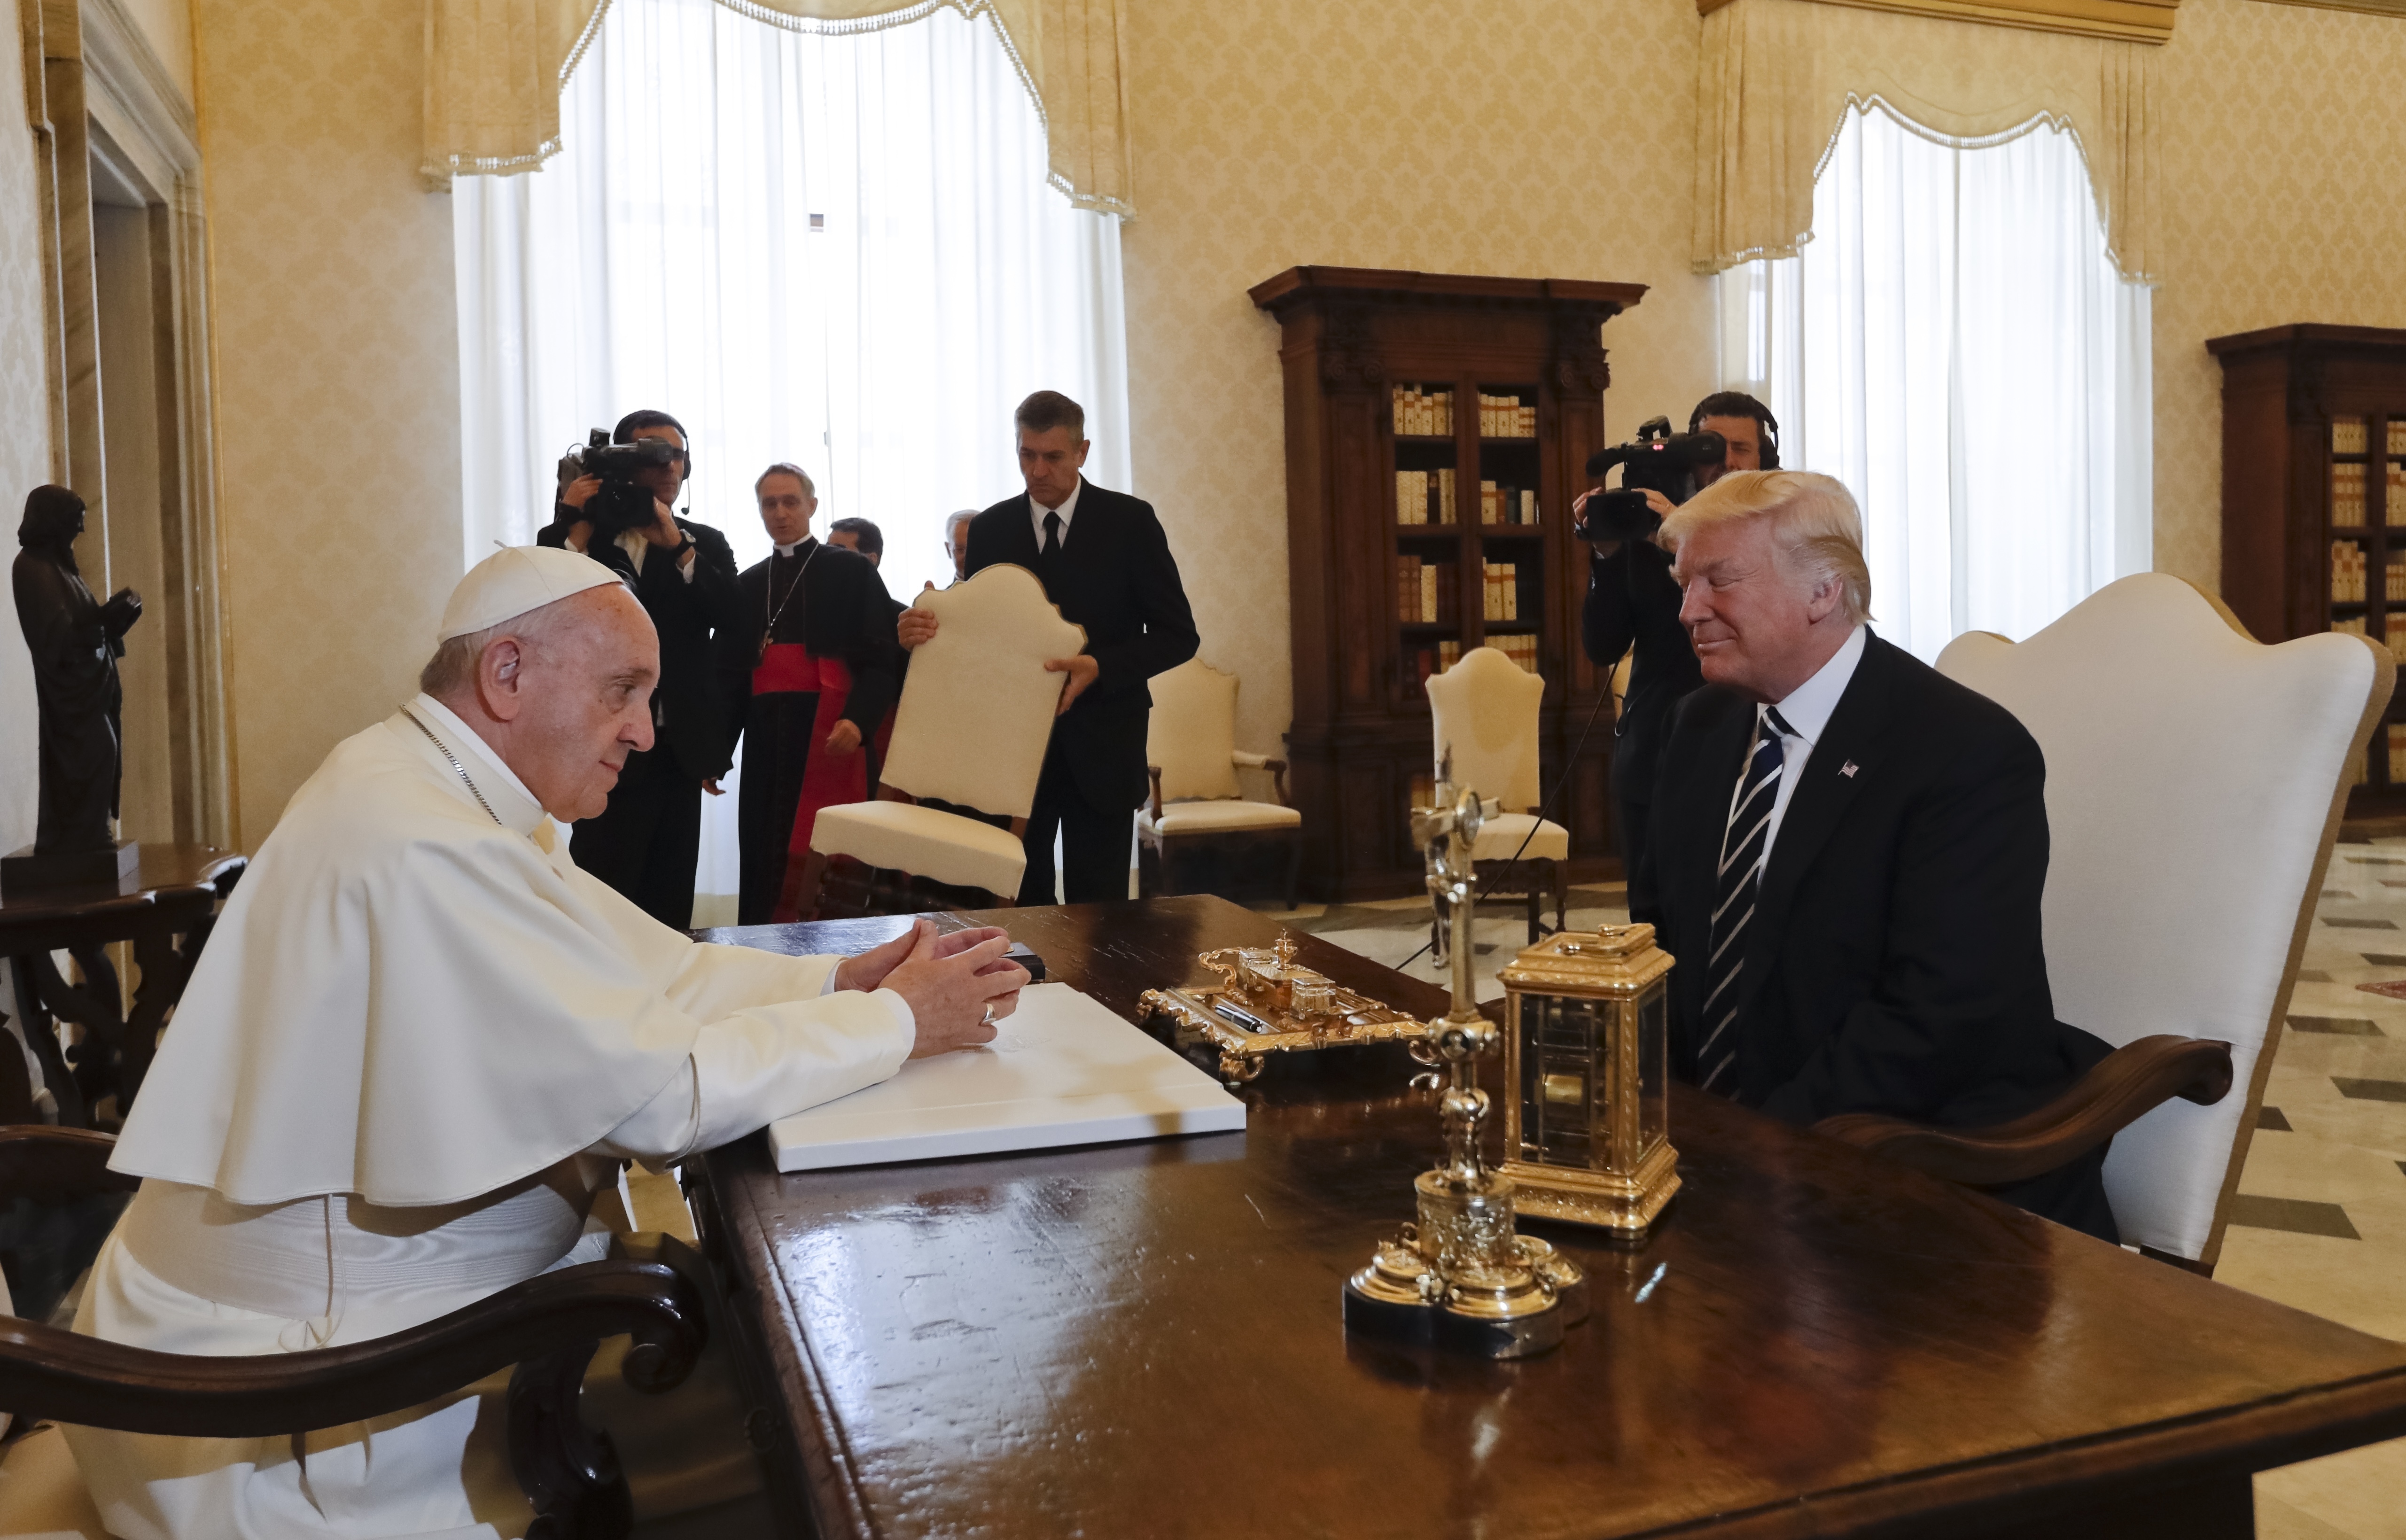 Pope Francis meets with President Donald Trump on the occasion of their private audience, at the Vatican, Wednesday, May 24, 2017. (AP Photo/Alessandra Tarantino, Pool)